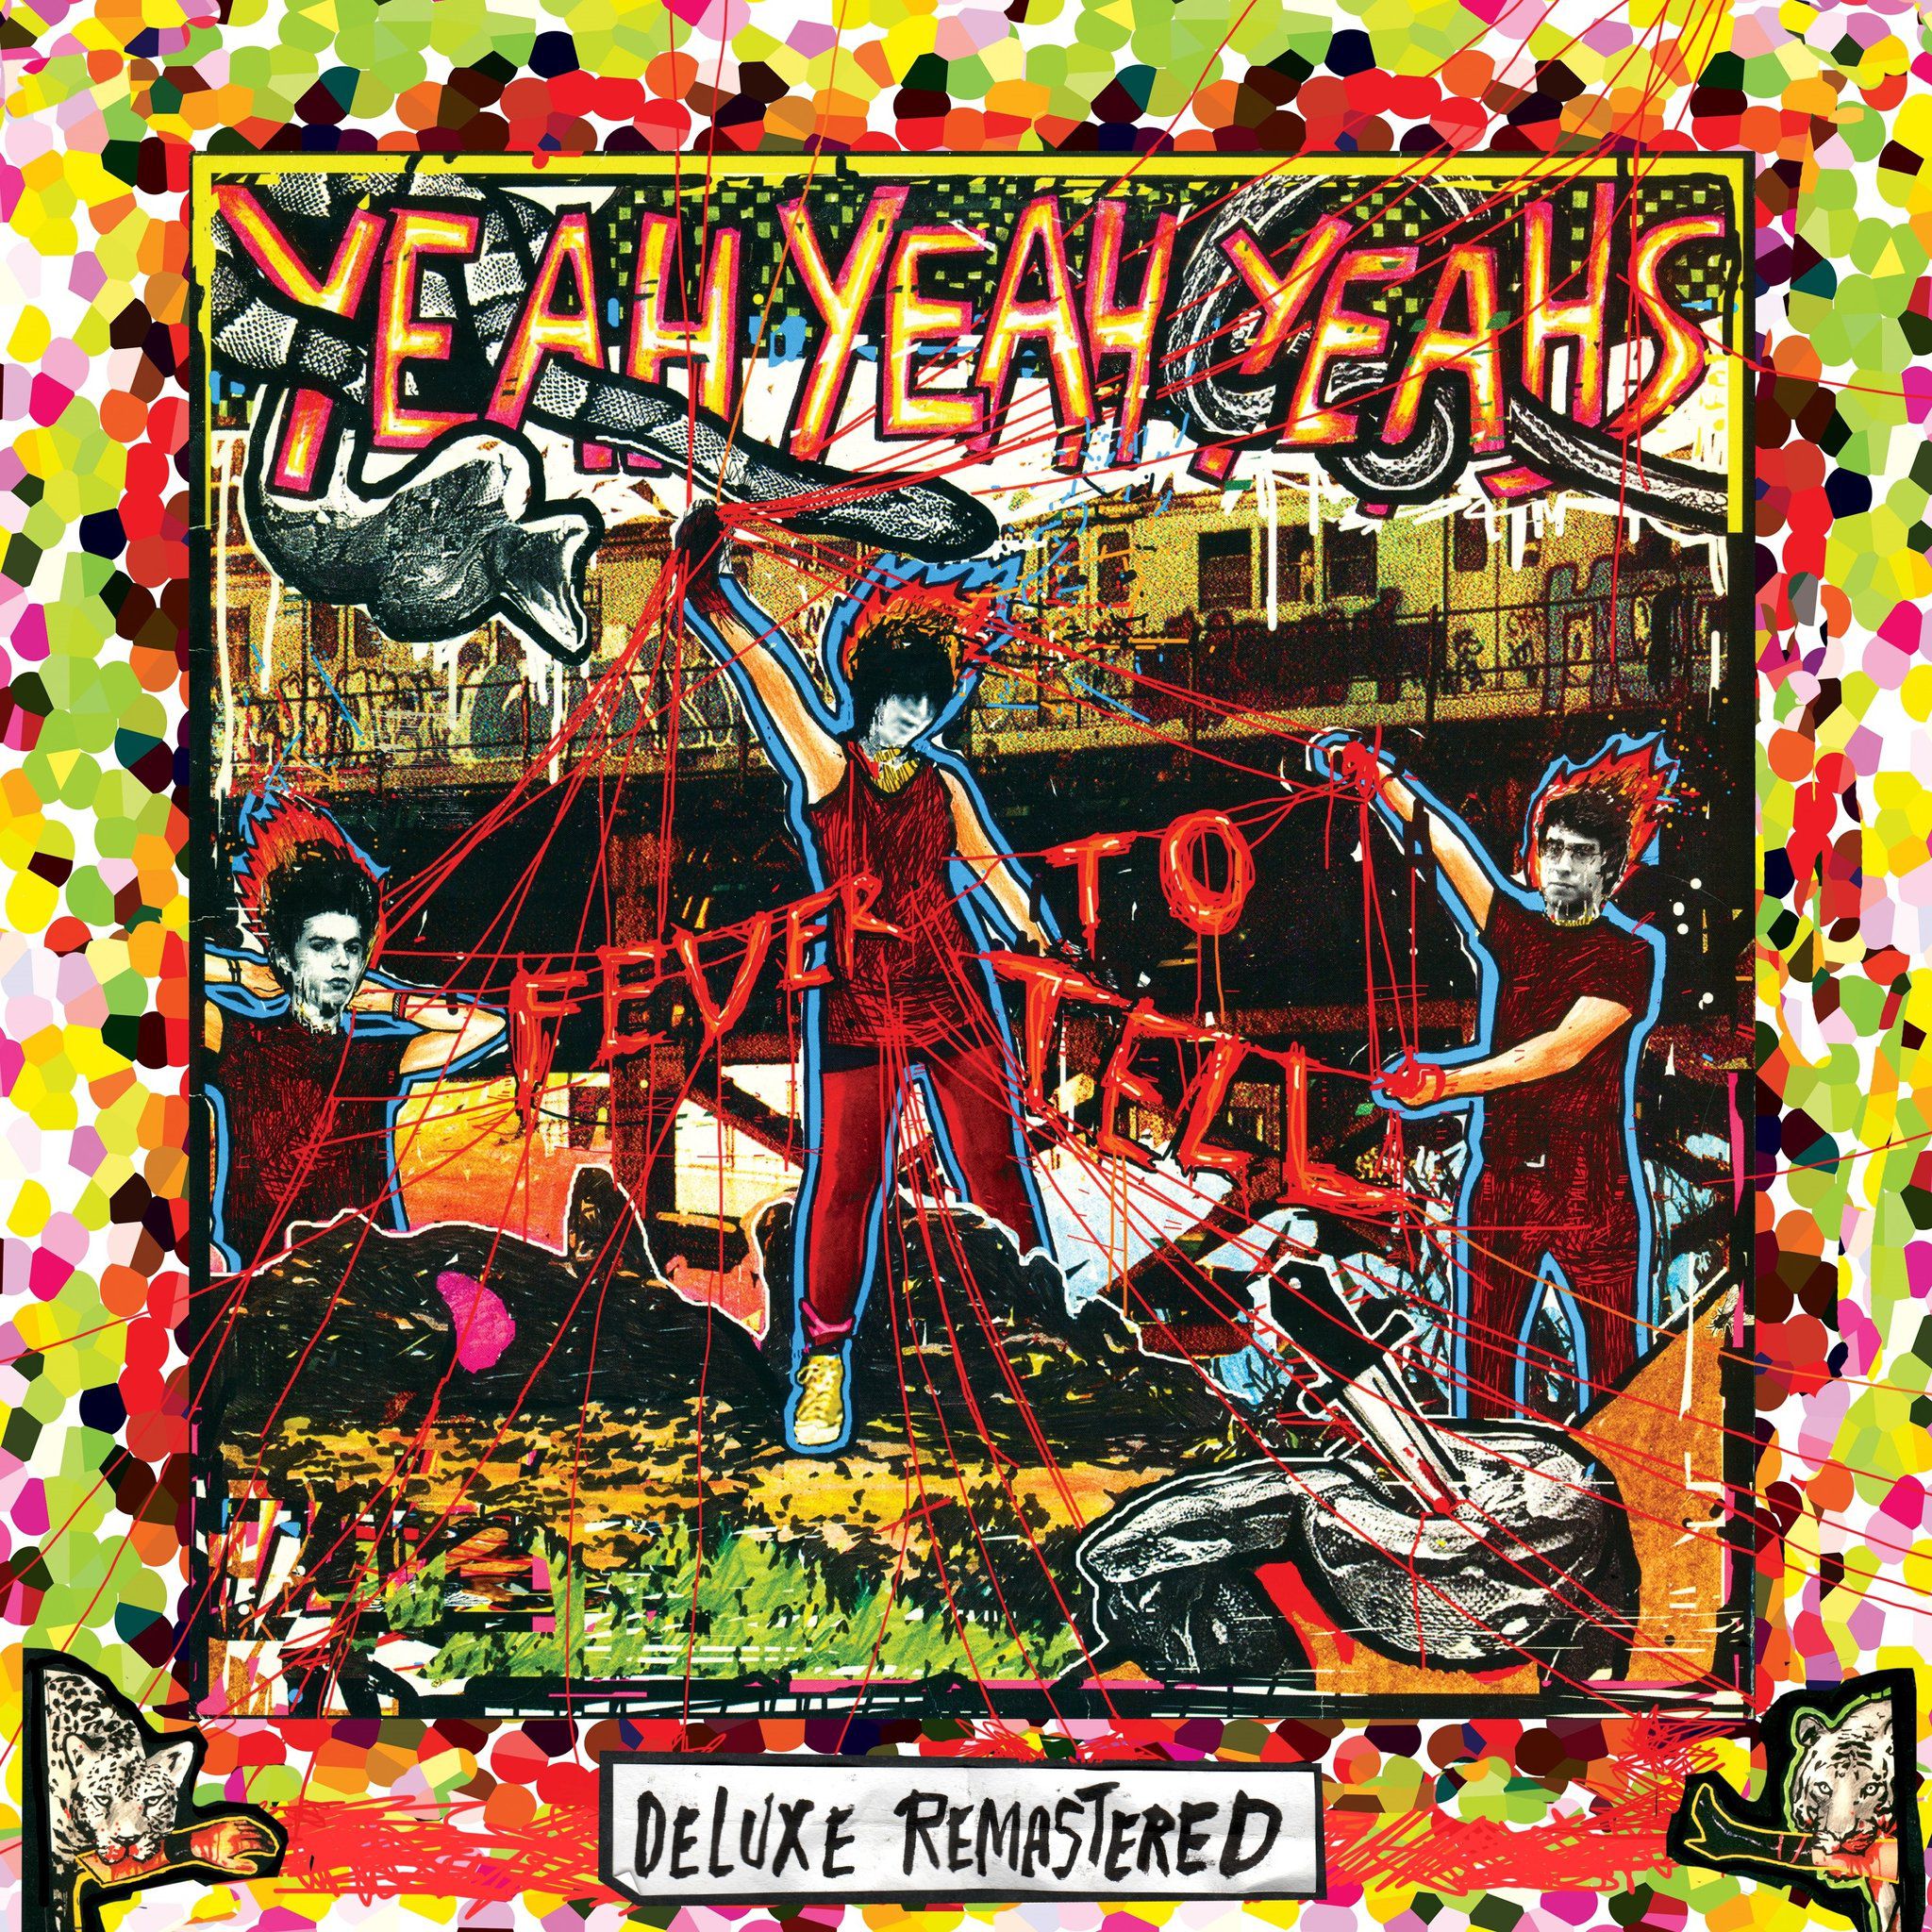 yyy deluxe c5eea859 824a 44f7 9897 f30cd9428c75 2048x2048 Yeah Yeah Yeahs announce Fever to Tell deluxe box set, share previously unheard track Shake It: Stream